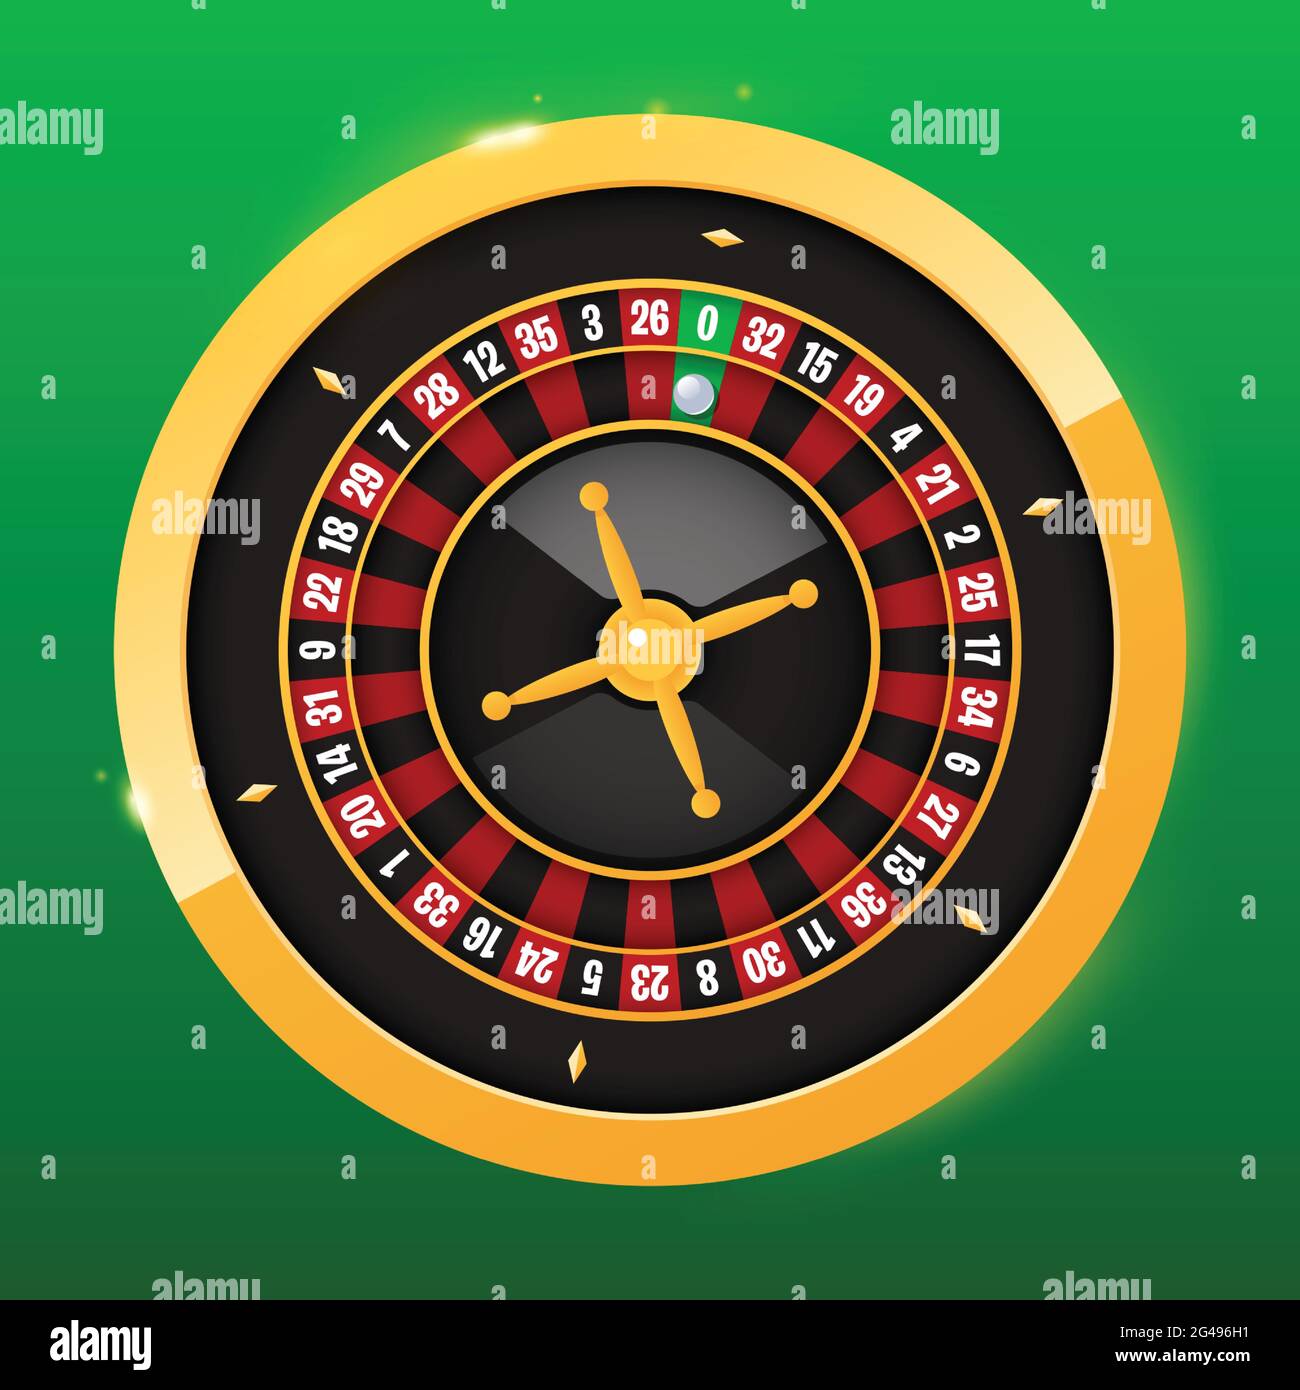 Realistic casino gambling roulette wheel on green background. Vector play chance luck roulette wheel illustration Stock Vector